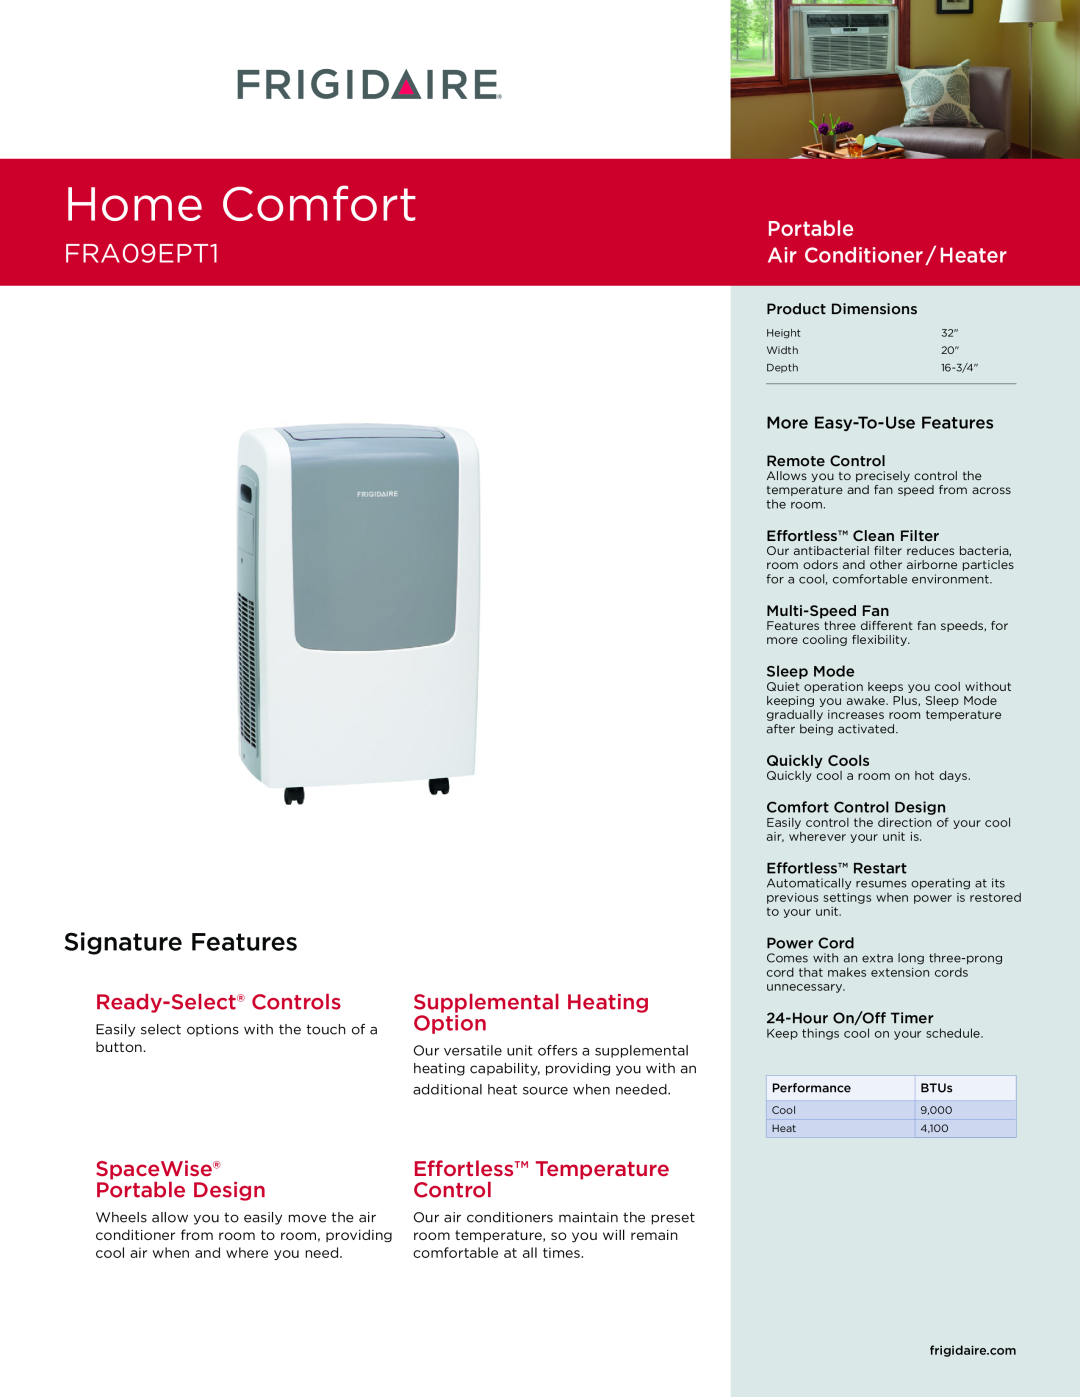 Frigidaire FRA09EPT1 dimensions Home Comfort, Signature Features, Portable Air Conditioner / Heater, Ready-Select Controls 